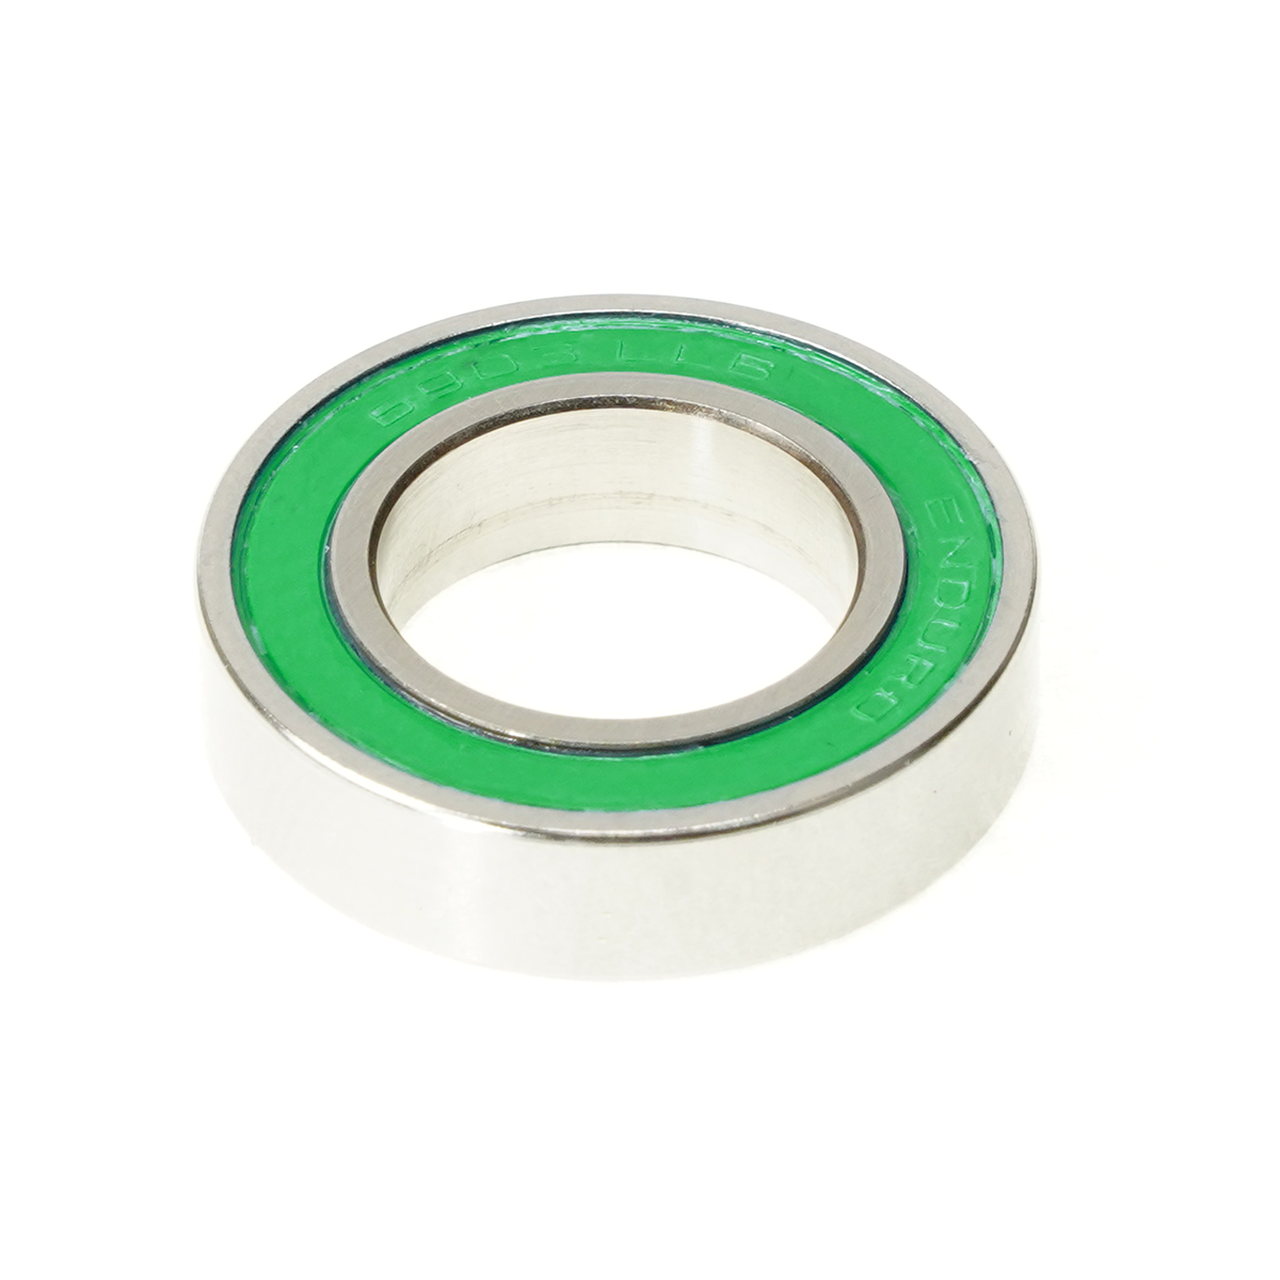 Enduro S6903 LLB - Stainless Steel Radial Bearing (C3 Clearance) - 17mm x 30mm x 7mm